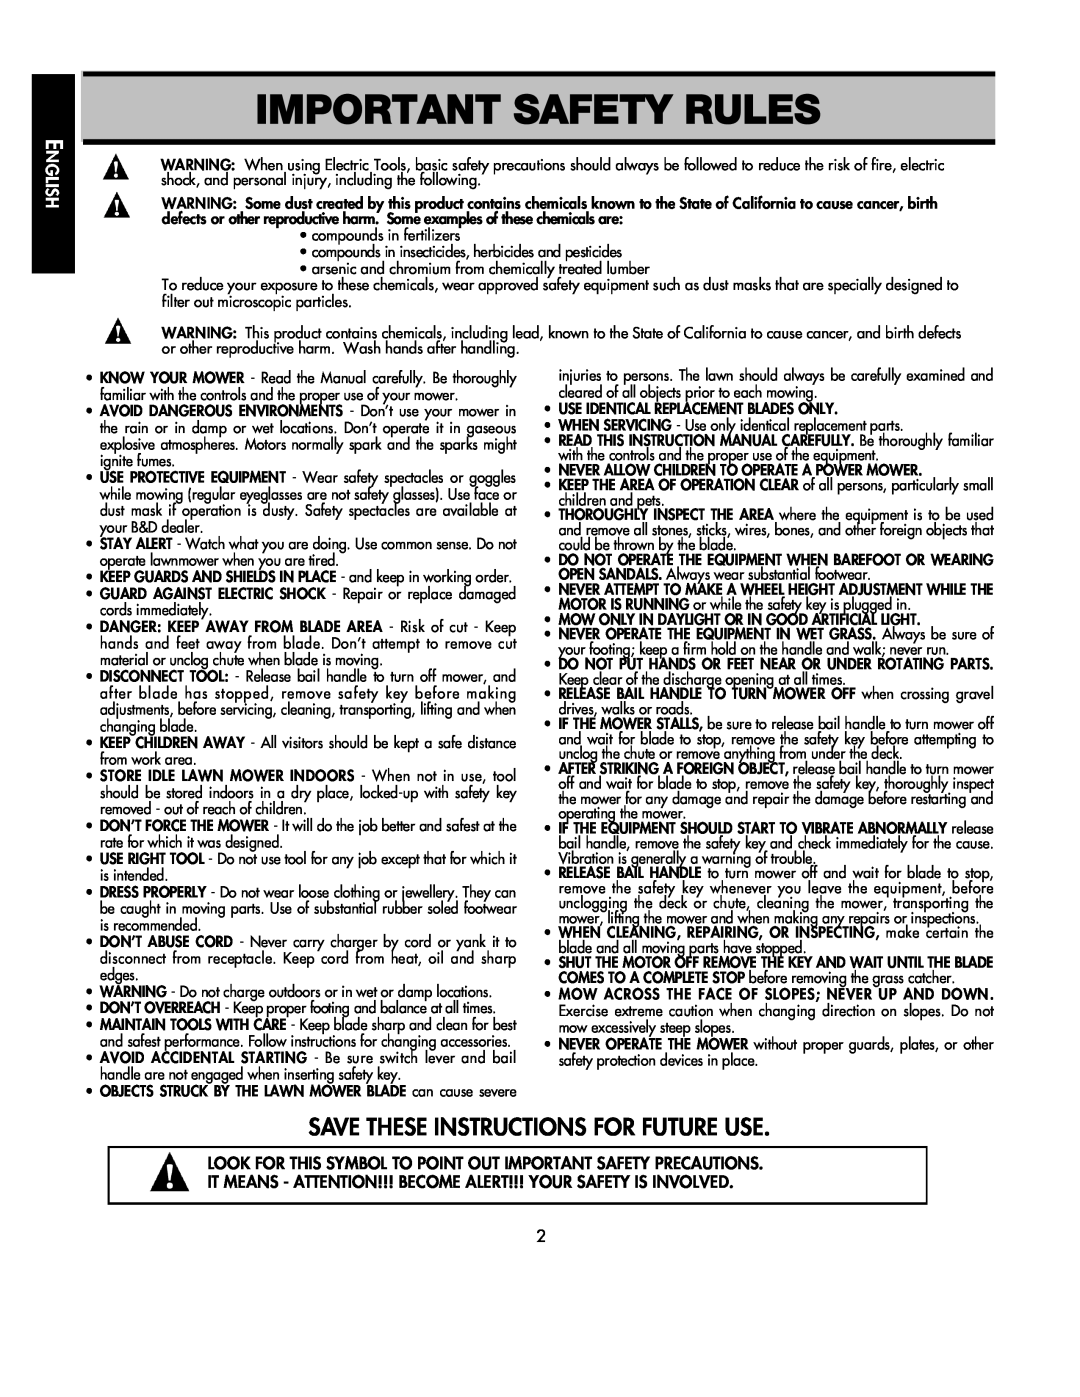 Black & Decker 598968-00 instruction manual Important Safety Rules, Save These Instructions For Future Use 